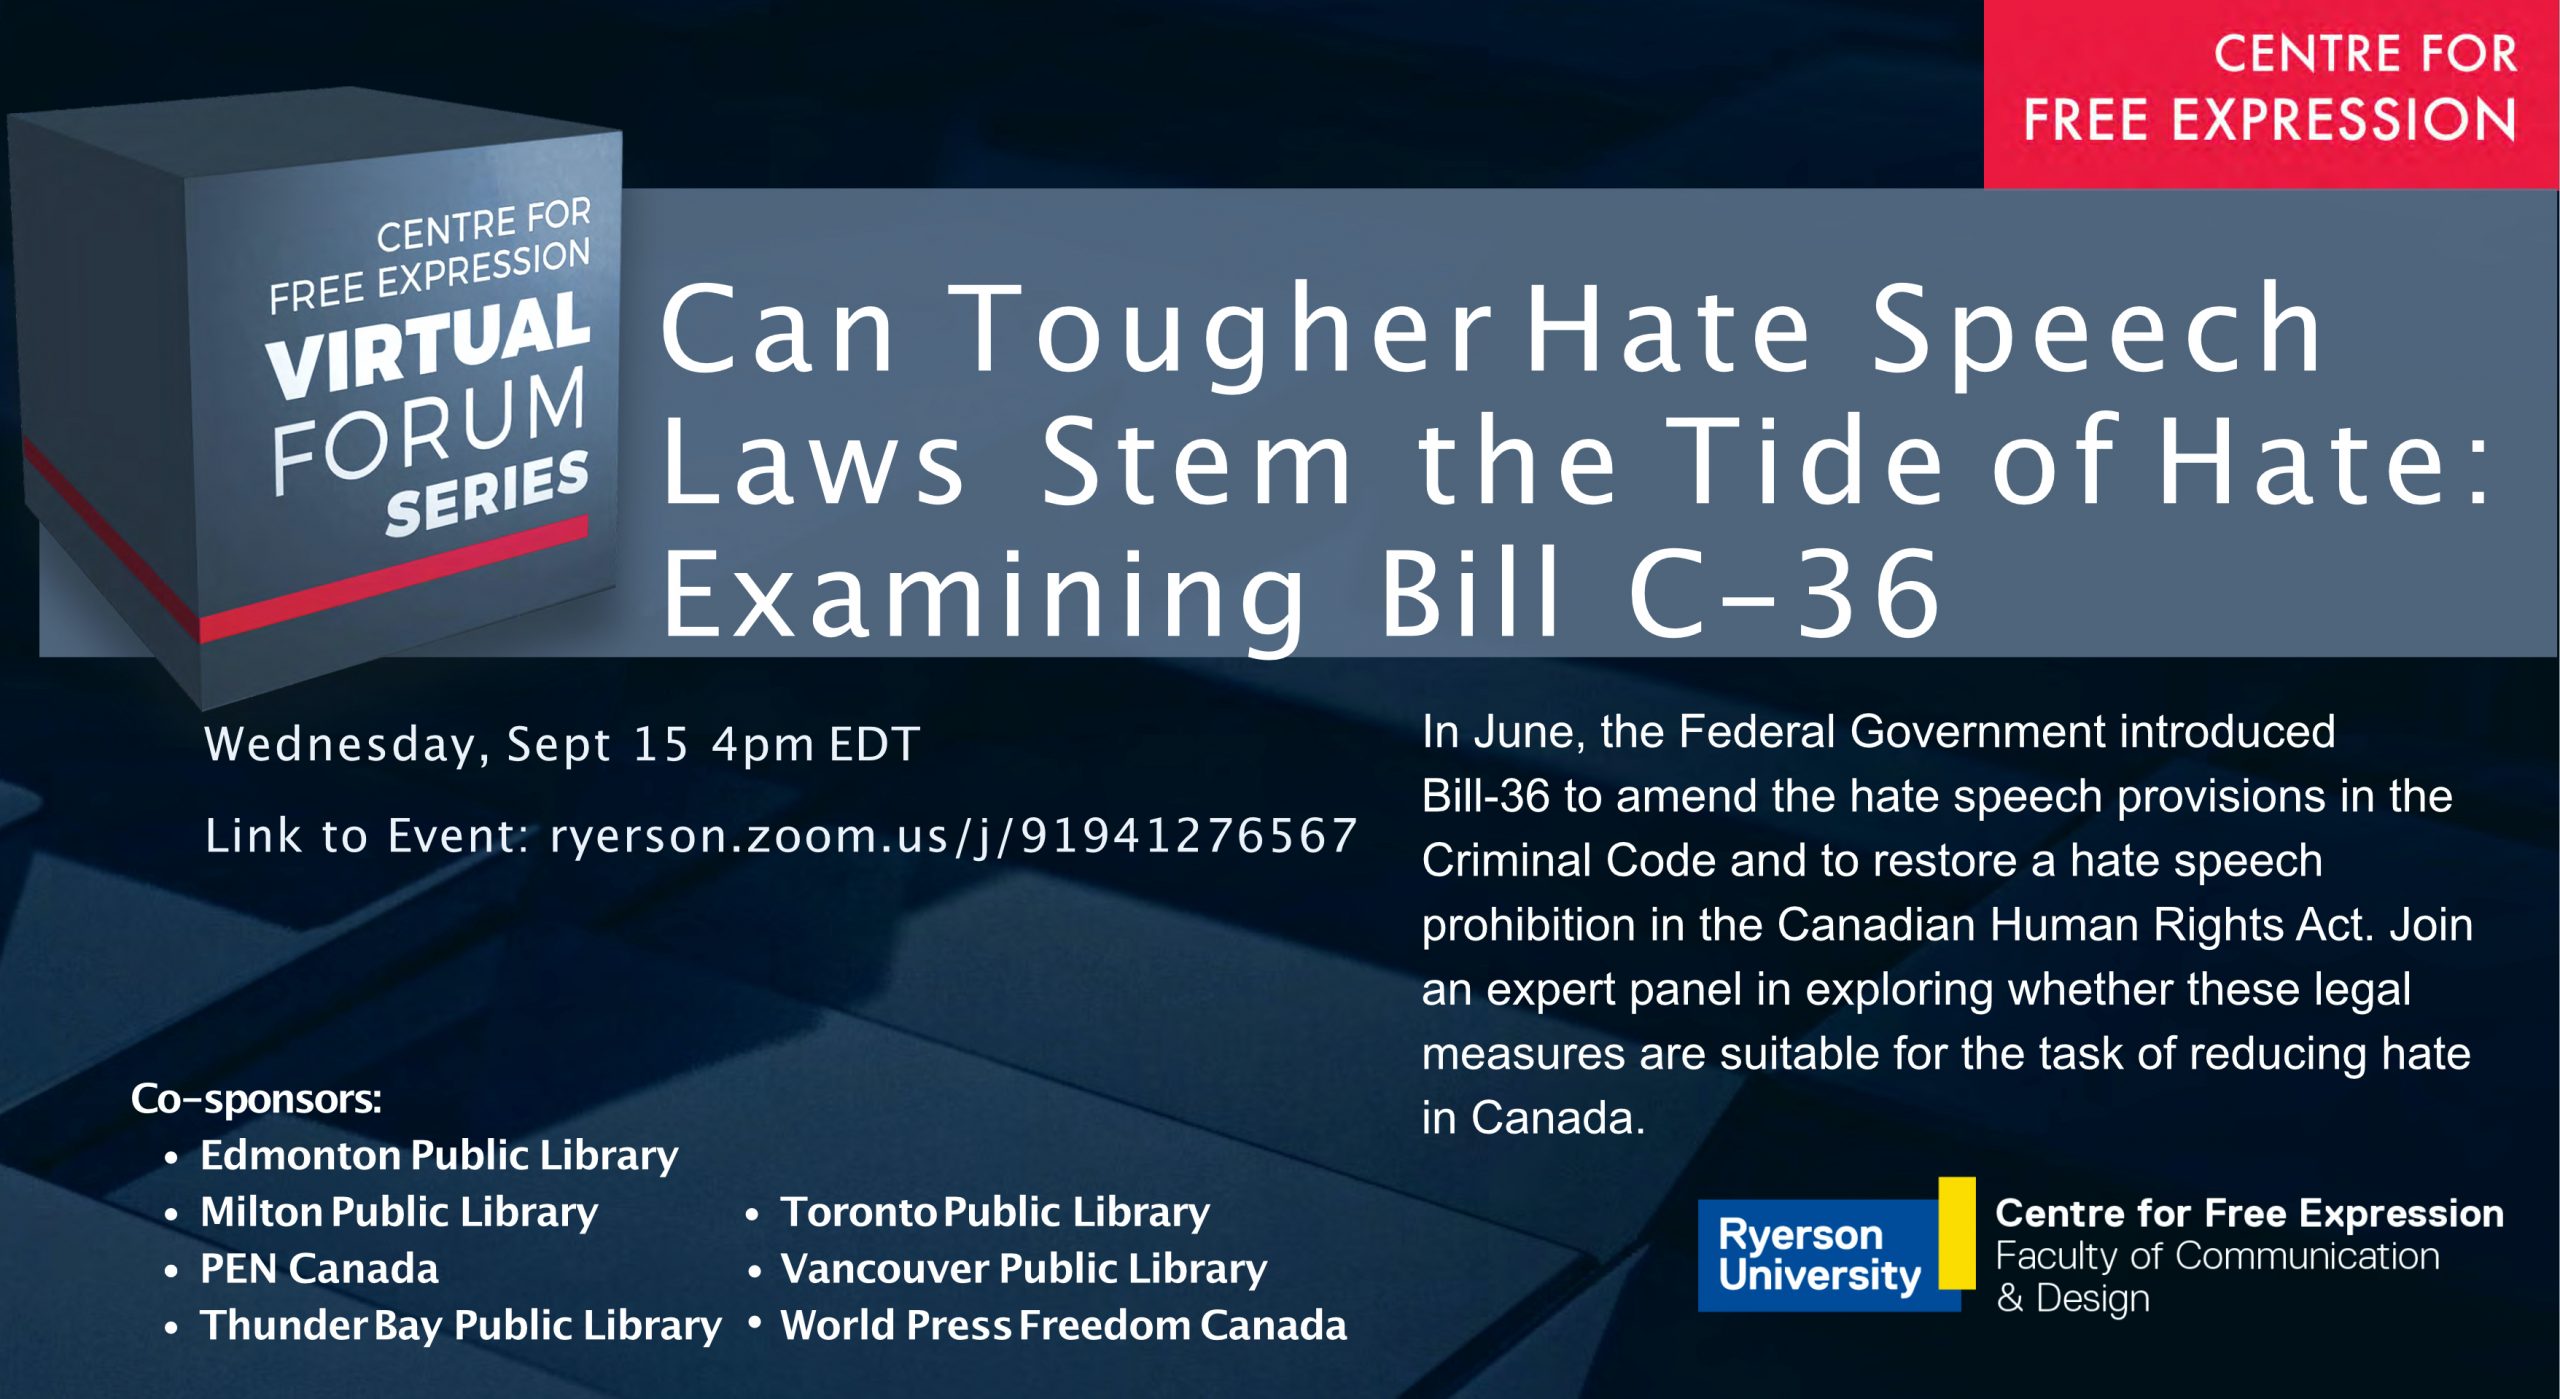 Can Tougher Hate Speech Laws Stem the Tide of Hate: Examining Bill C-36